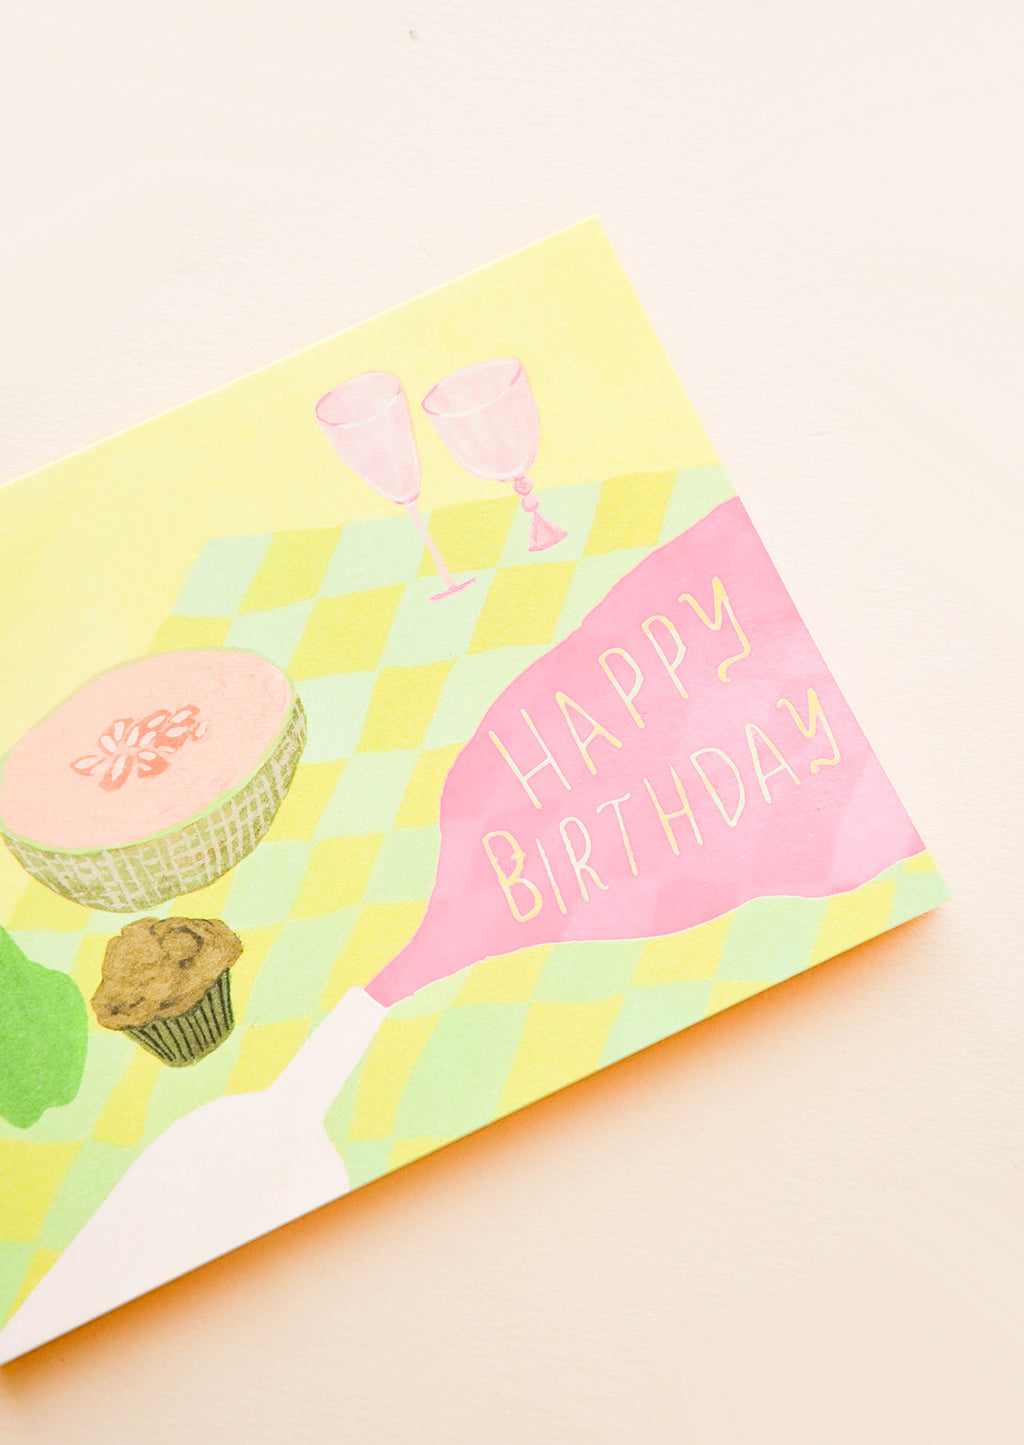 2: Greeting card with picnic setting, neon pink spilled wine puddle has letters reading "Happy Birthday"